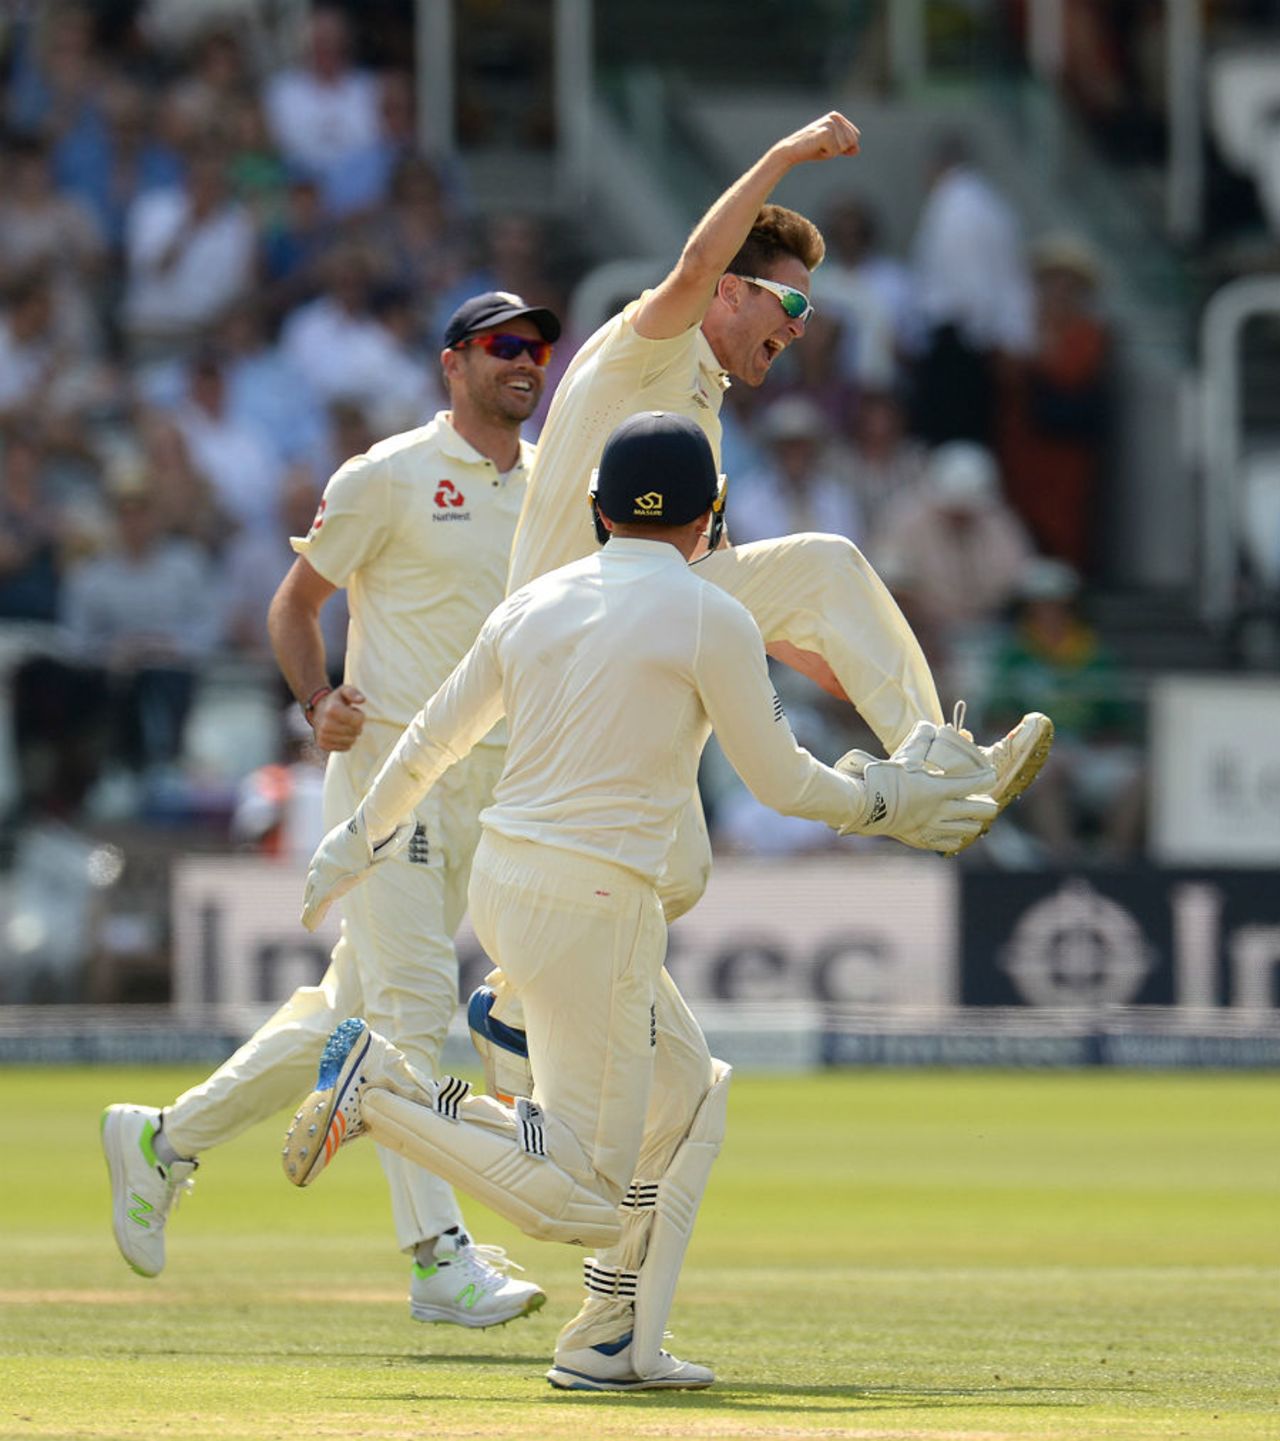 Liam Dawson claimed the big wicket of Hashim Amla, England v South Africa, 1st Investec Test, Lord's, 4th day, July 9, 2017